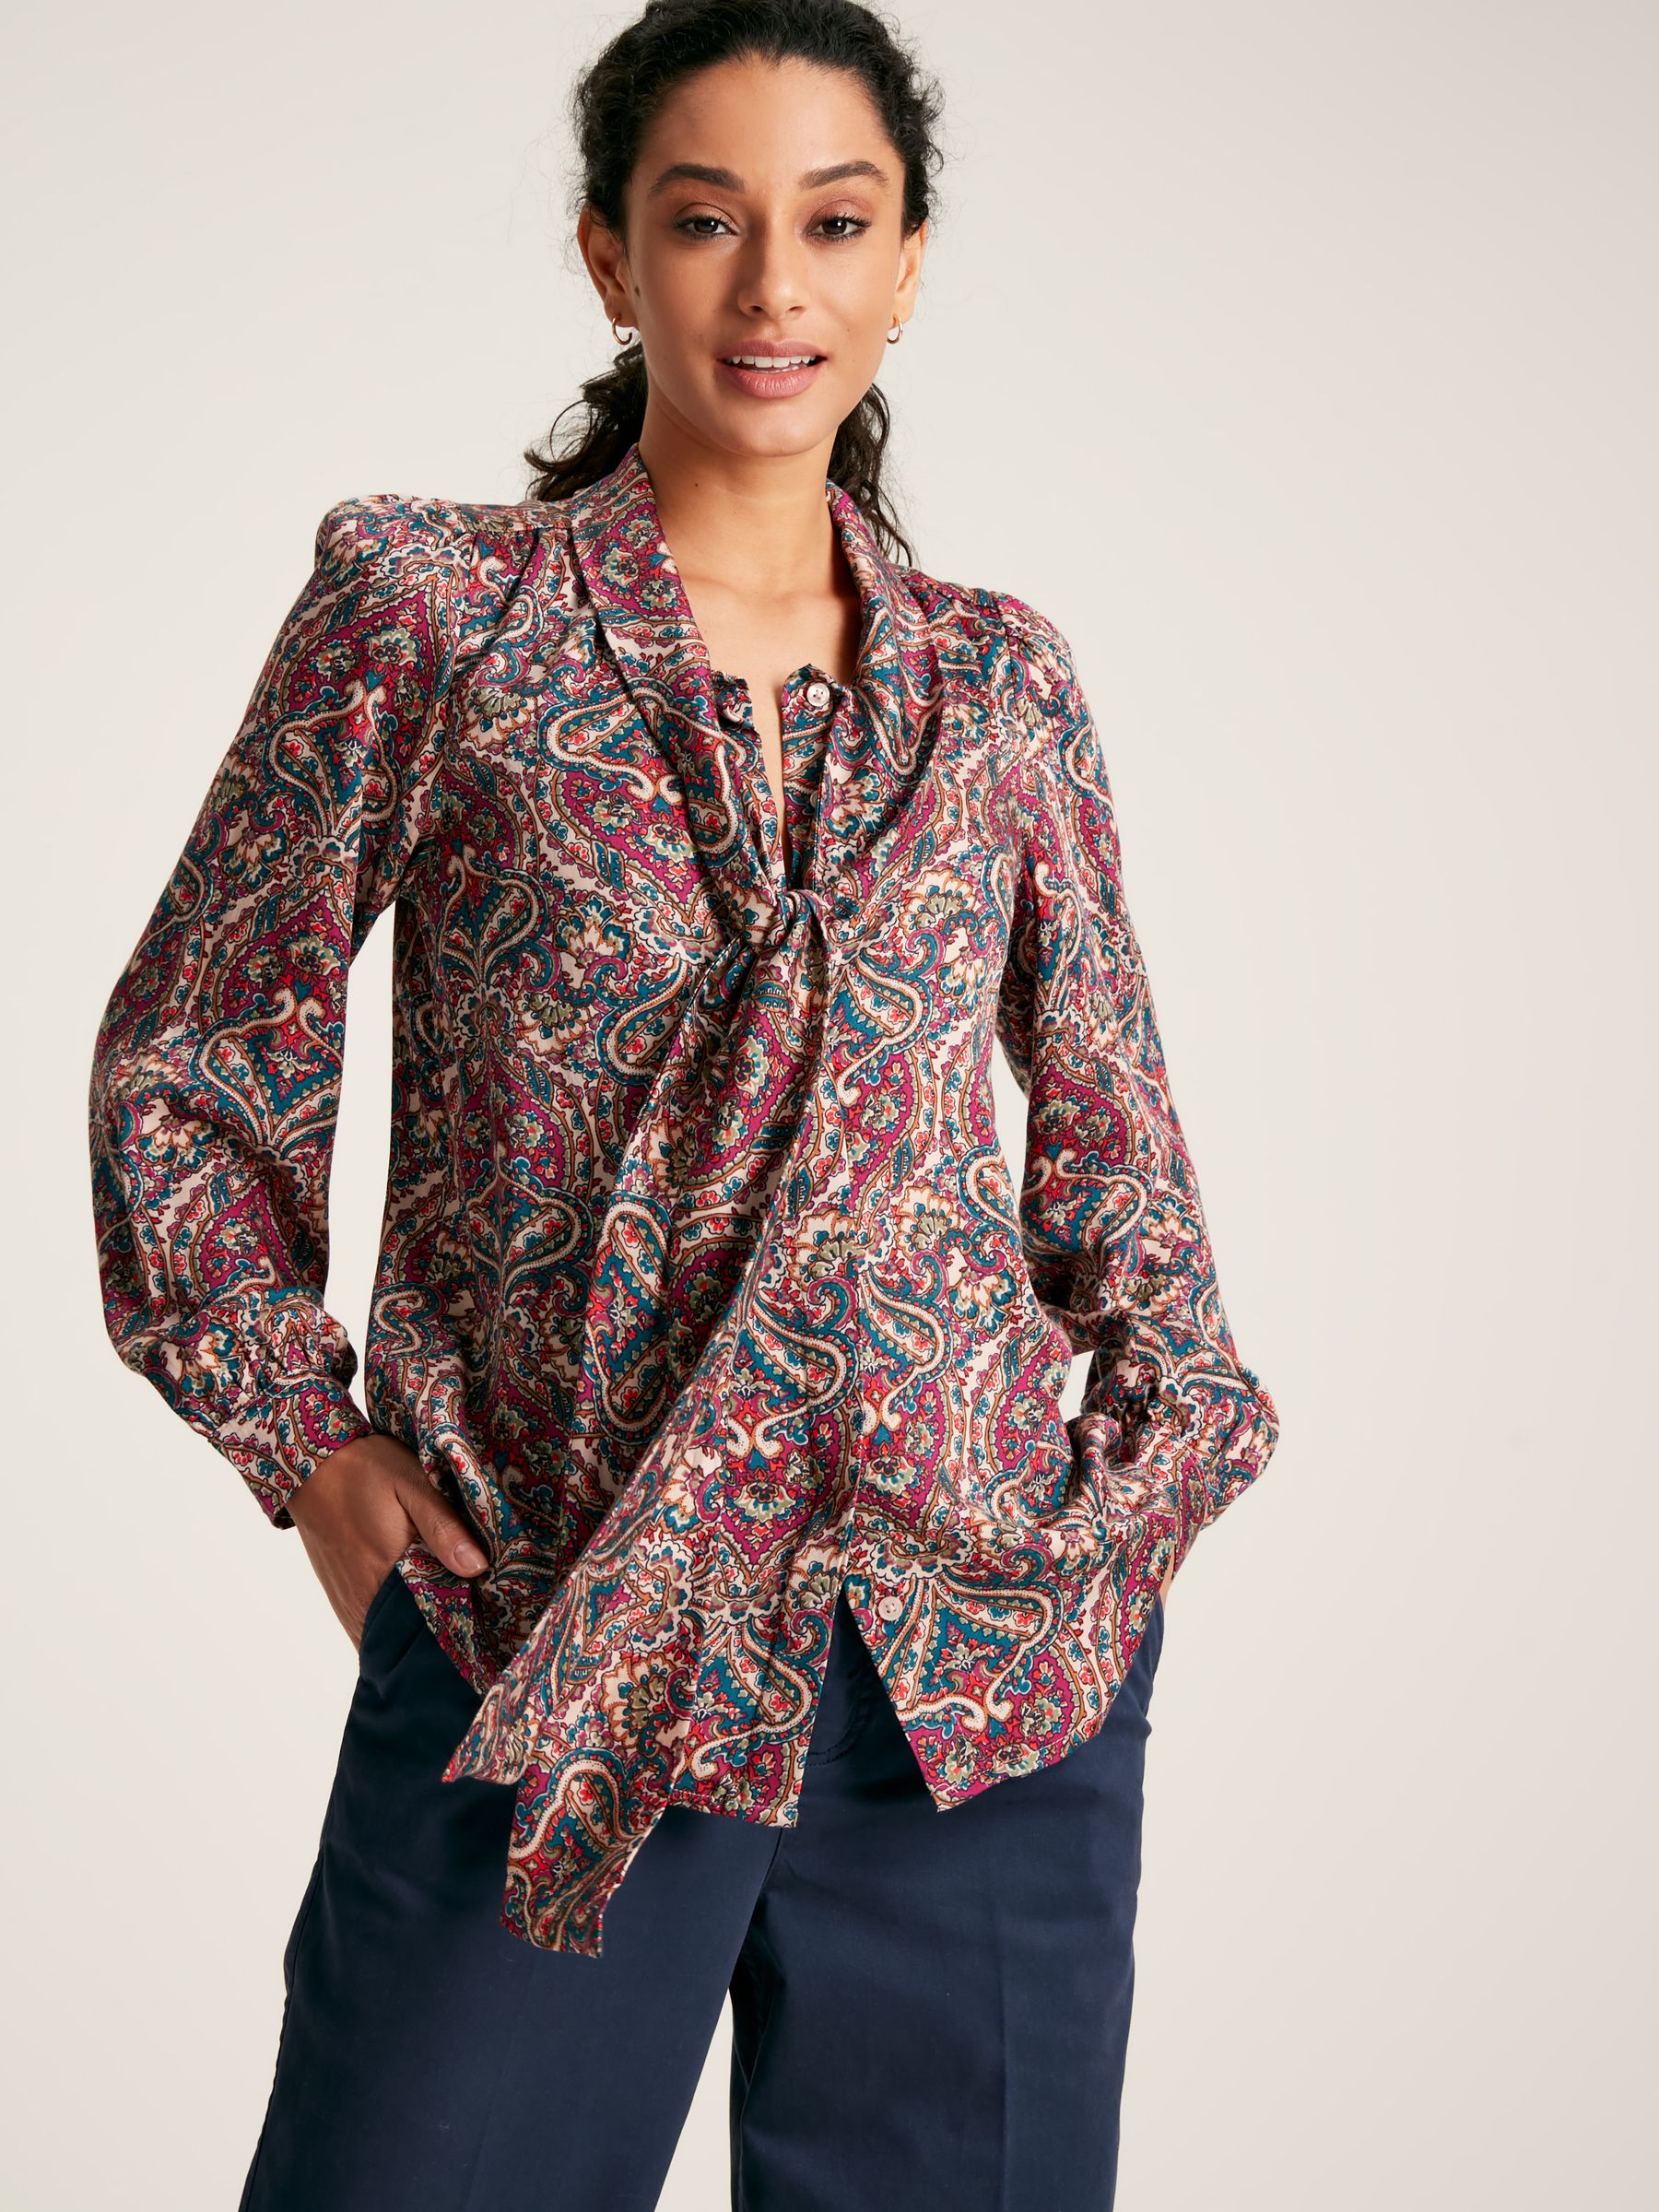 Buy Joules Everly Tie Neck Blouse from the Joules online shop